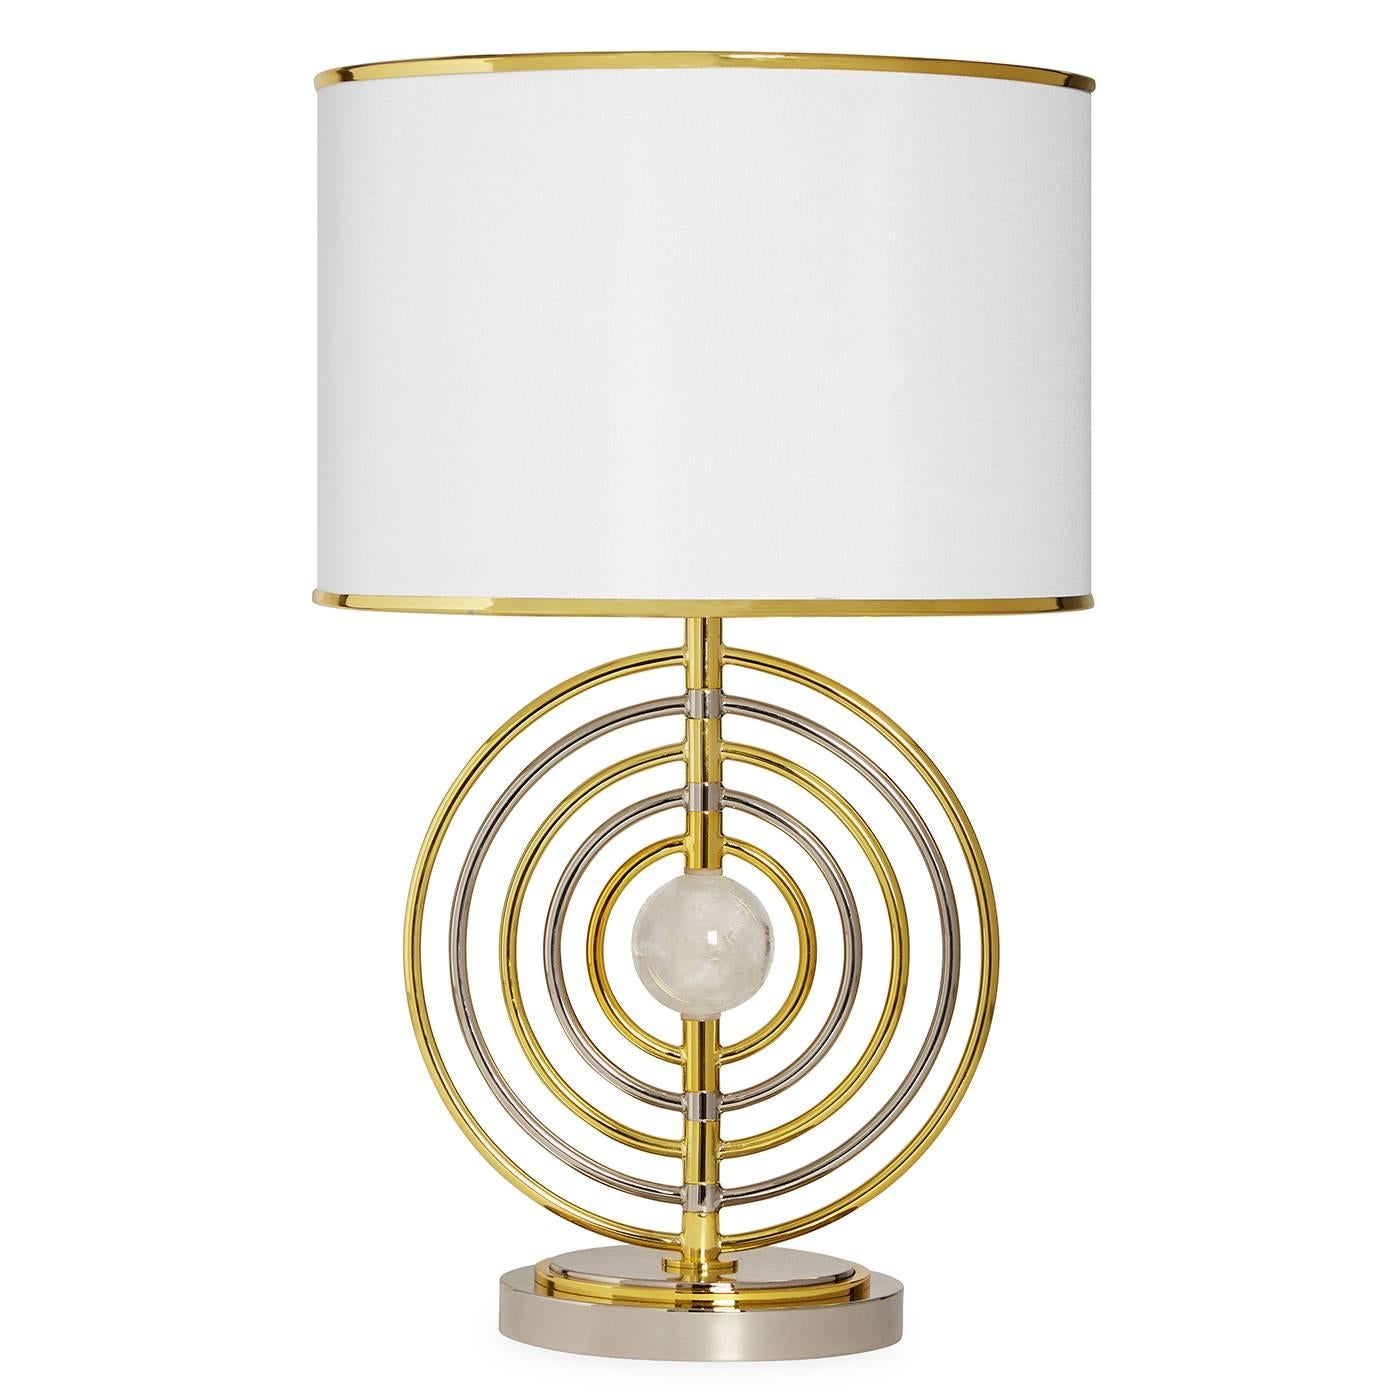 Mixed metals. A quartz crystal sphere surrounded by Space Age-inspired rings of polished brass and nickel and topped with a polished brass trimmed shade. The semi-precious stone adds a touch of twinkle, while the movable rings offer endless